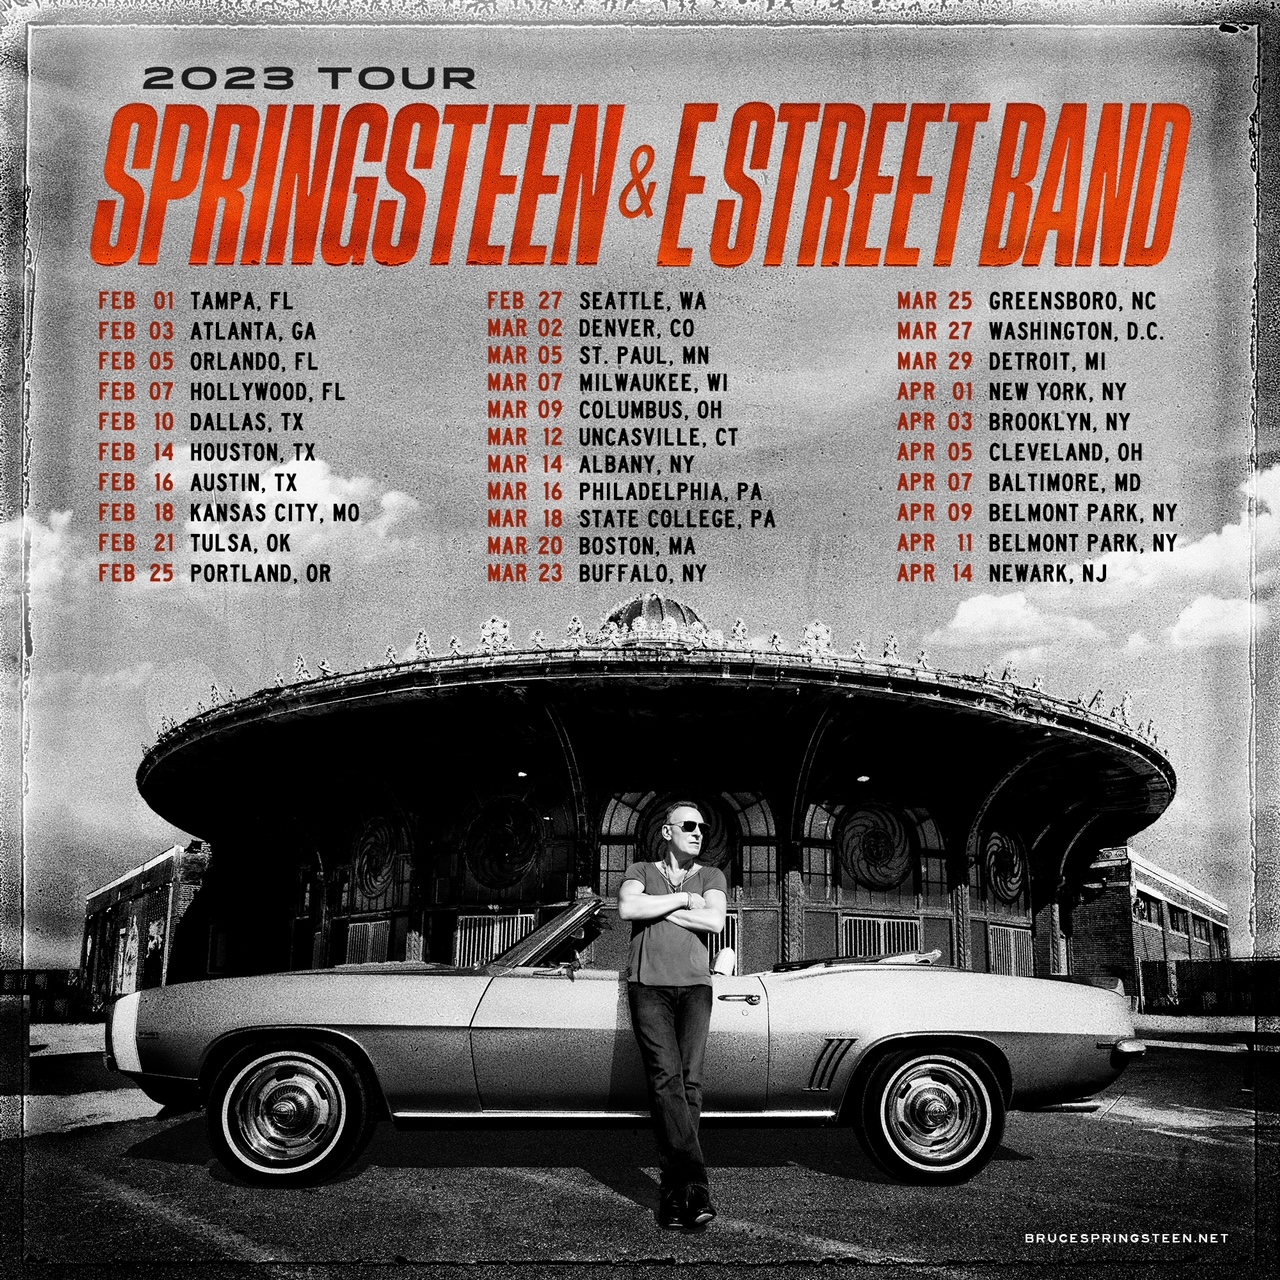 Bruce Springsteen and The E Street Band Announce 2023 Tour at Capital